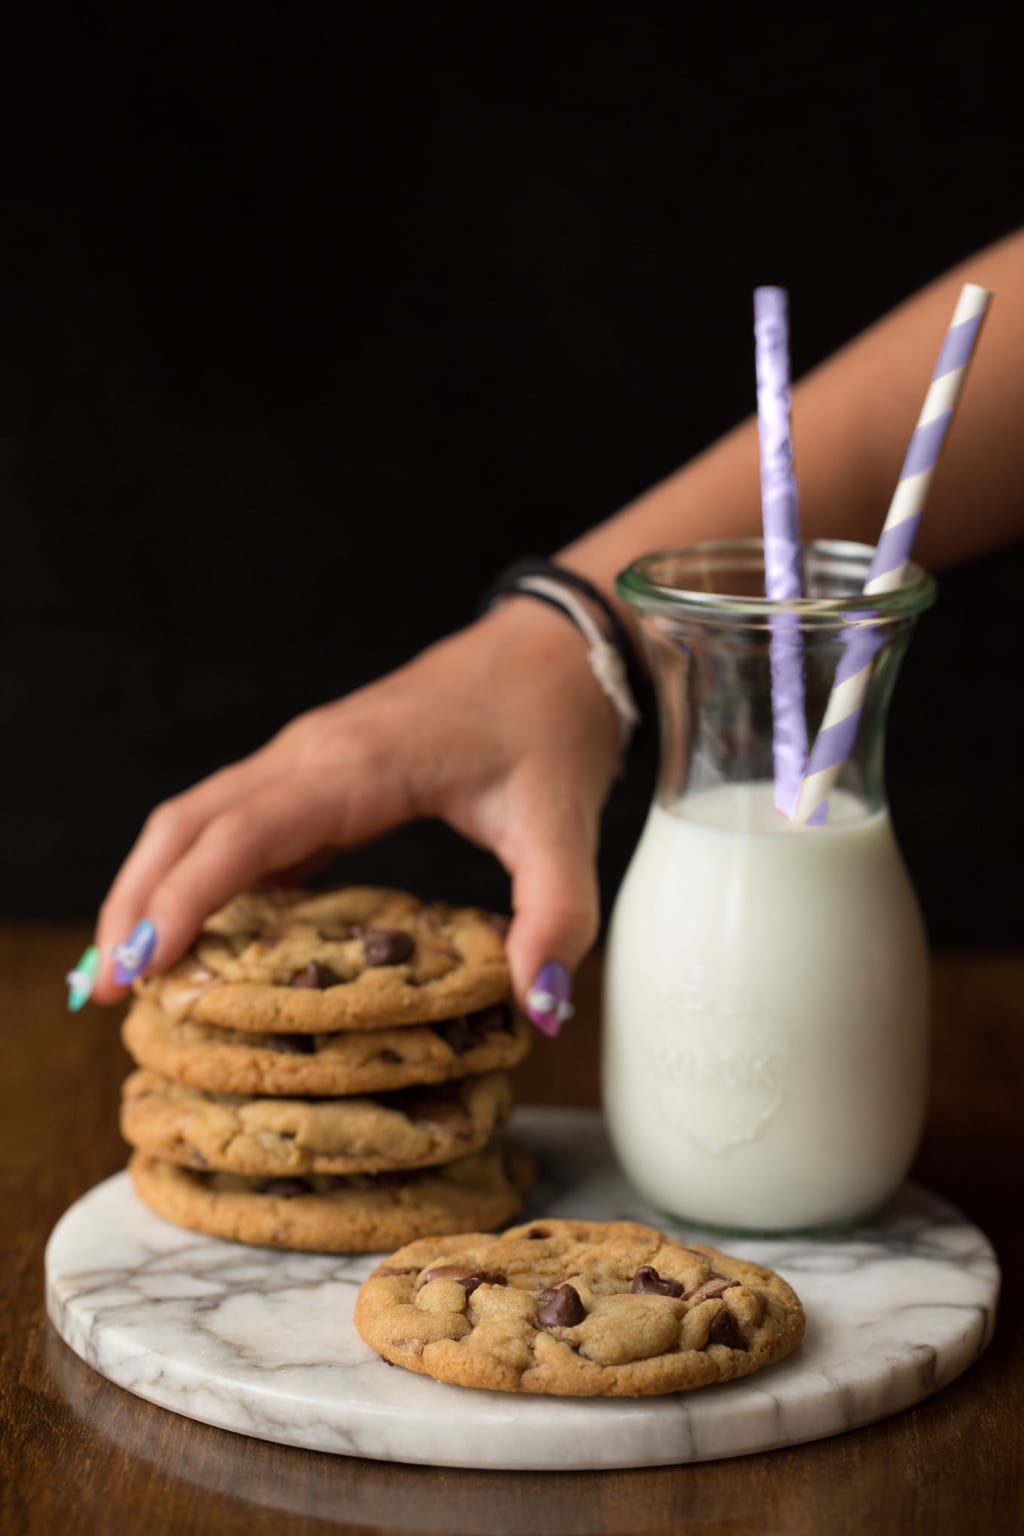 A shot of a young girl's hands sneaking a One Bowl Toffee Bar Chocolate Chip Cookie from a stack next to a carafe of milk.